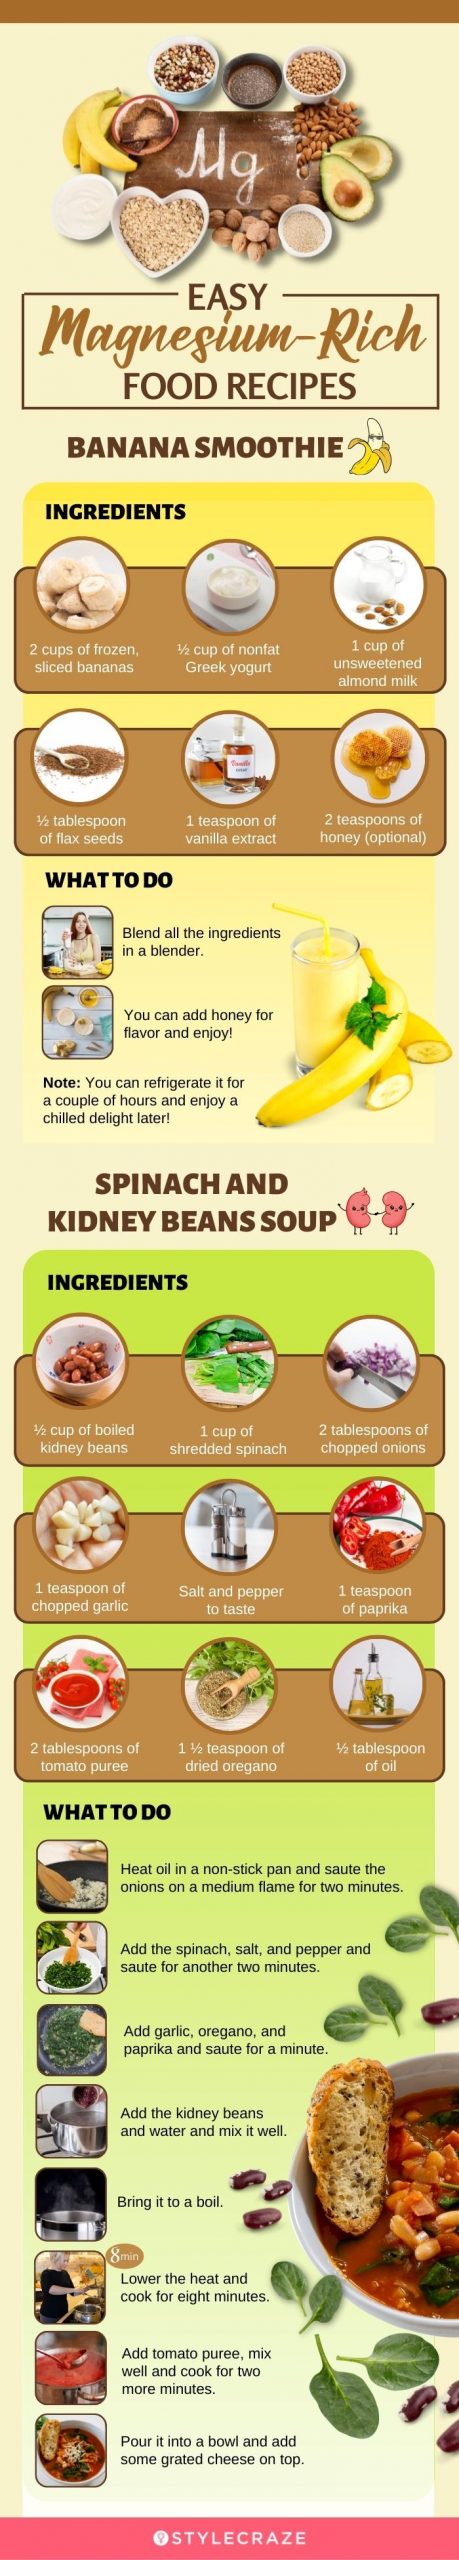 easy magnesium rich food recipes (infographic)